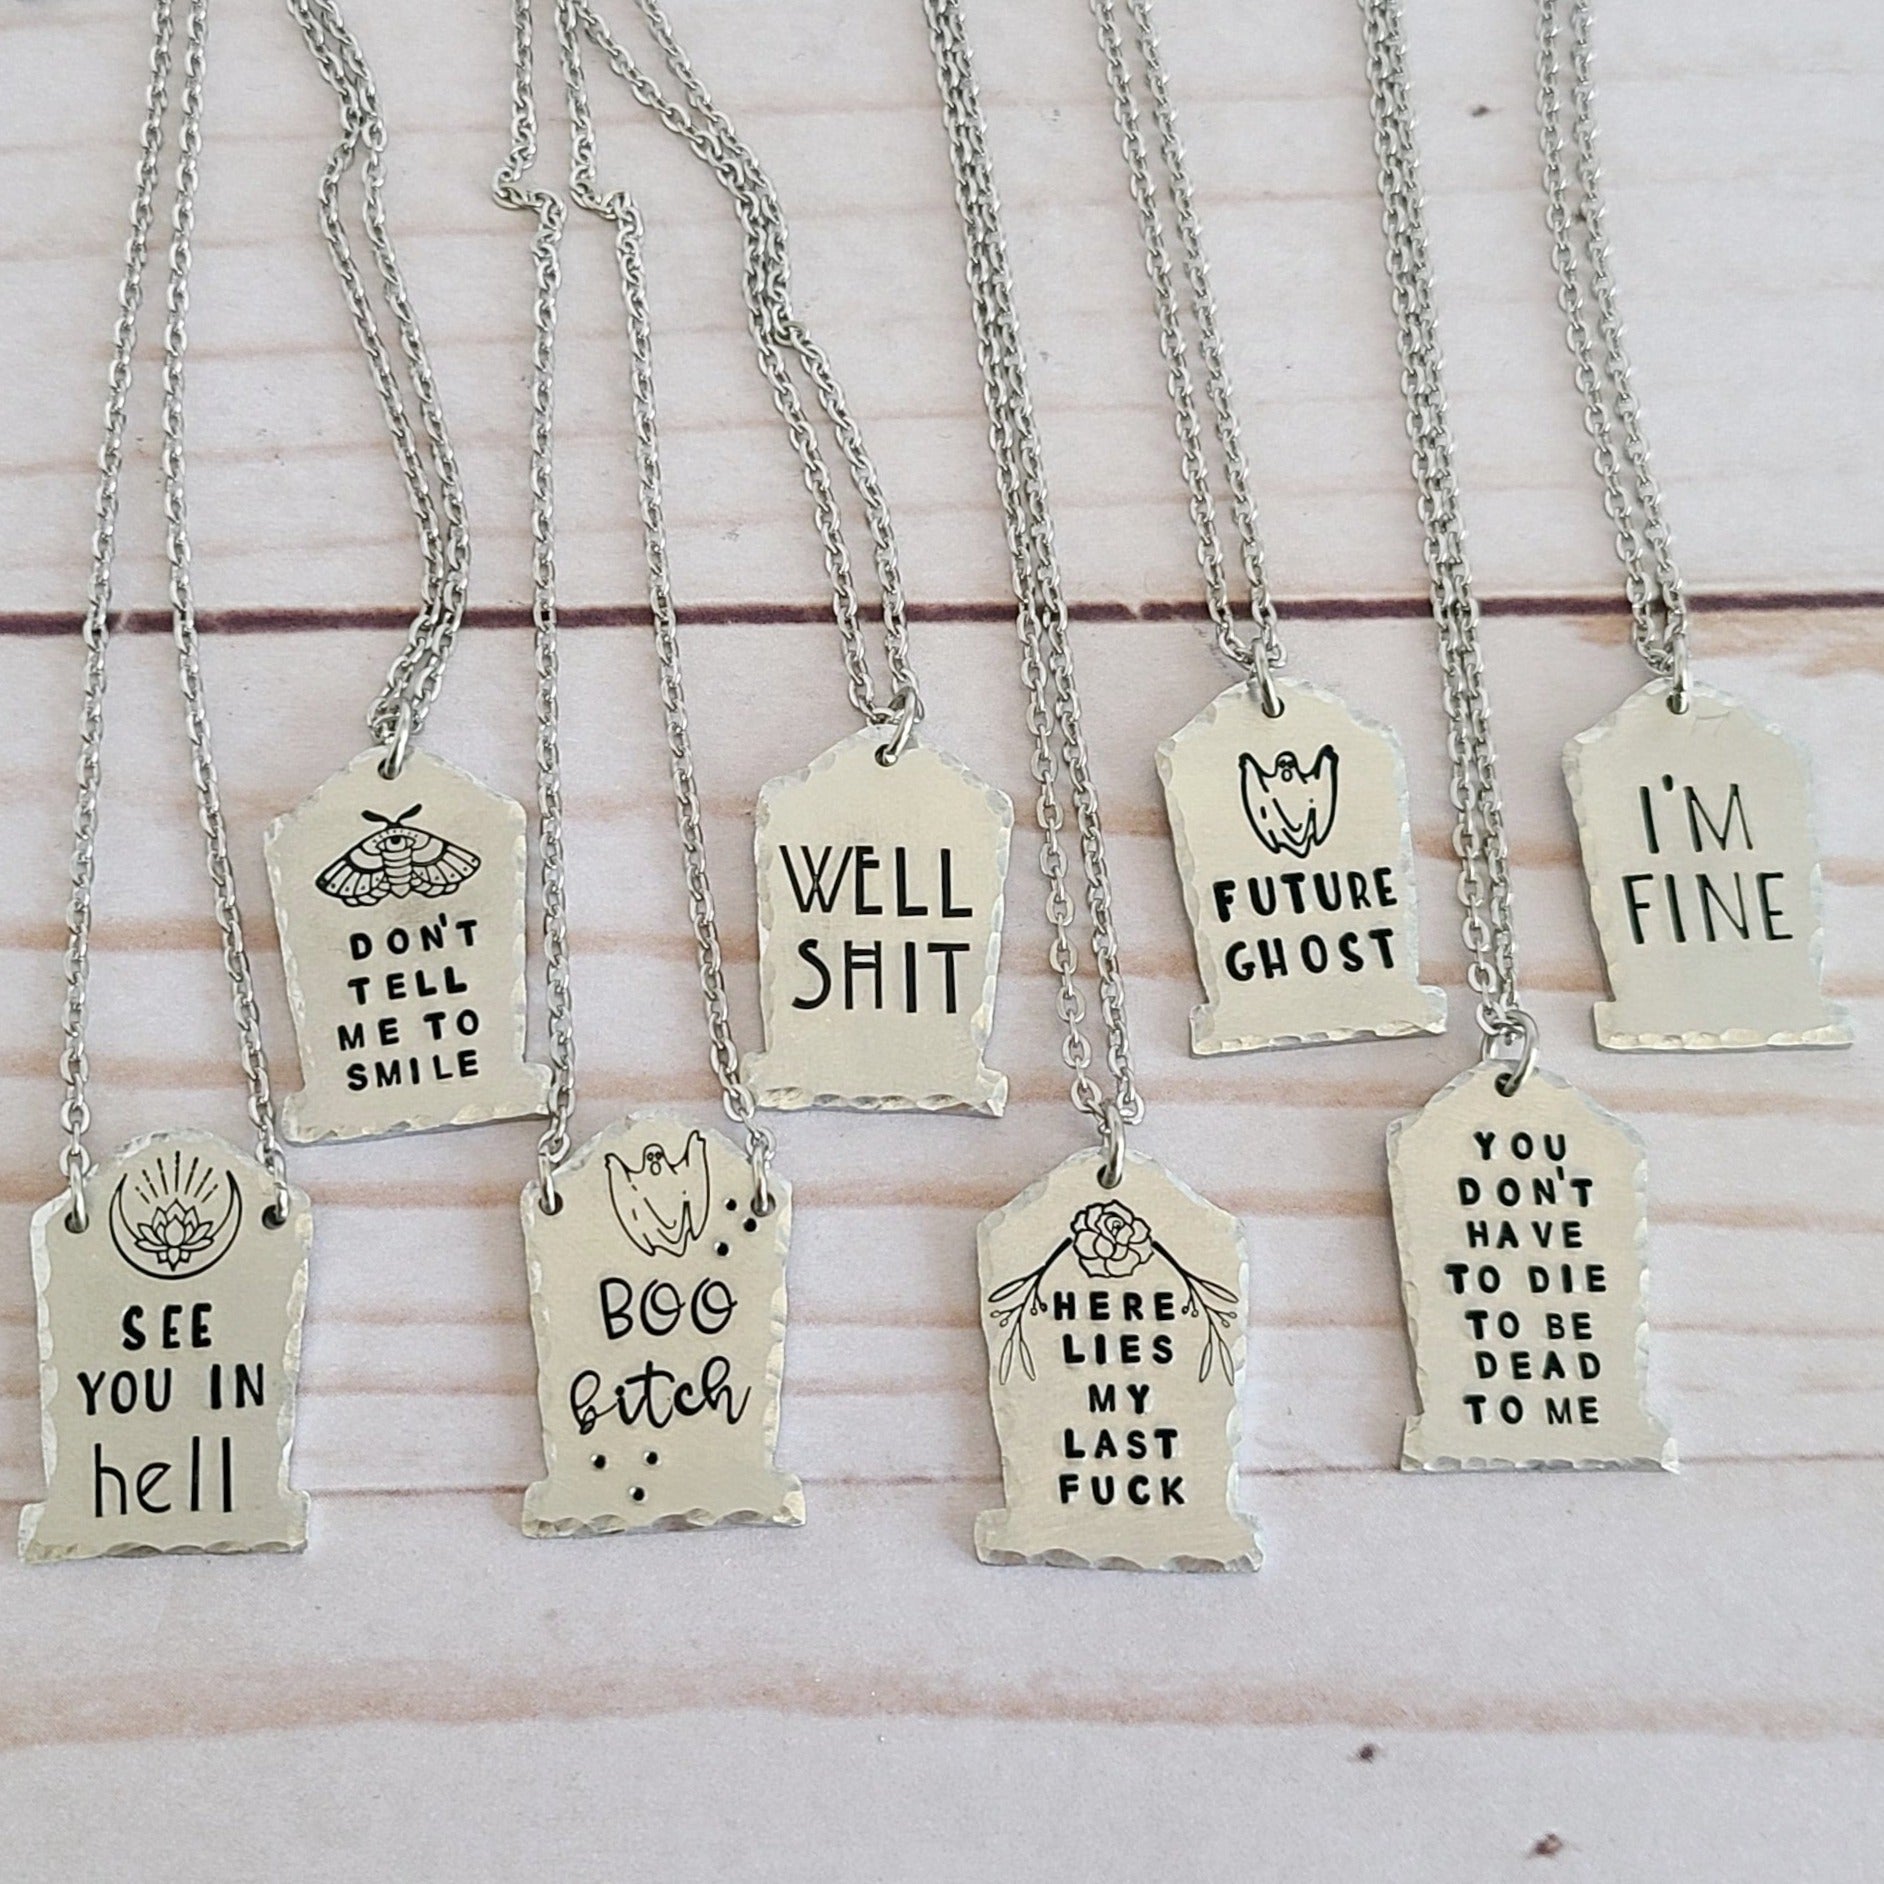 Silver Tombstone Shaped Charms on a necklace chain - the tombstones are stamped with different spooky sayings